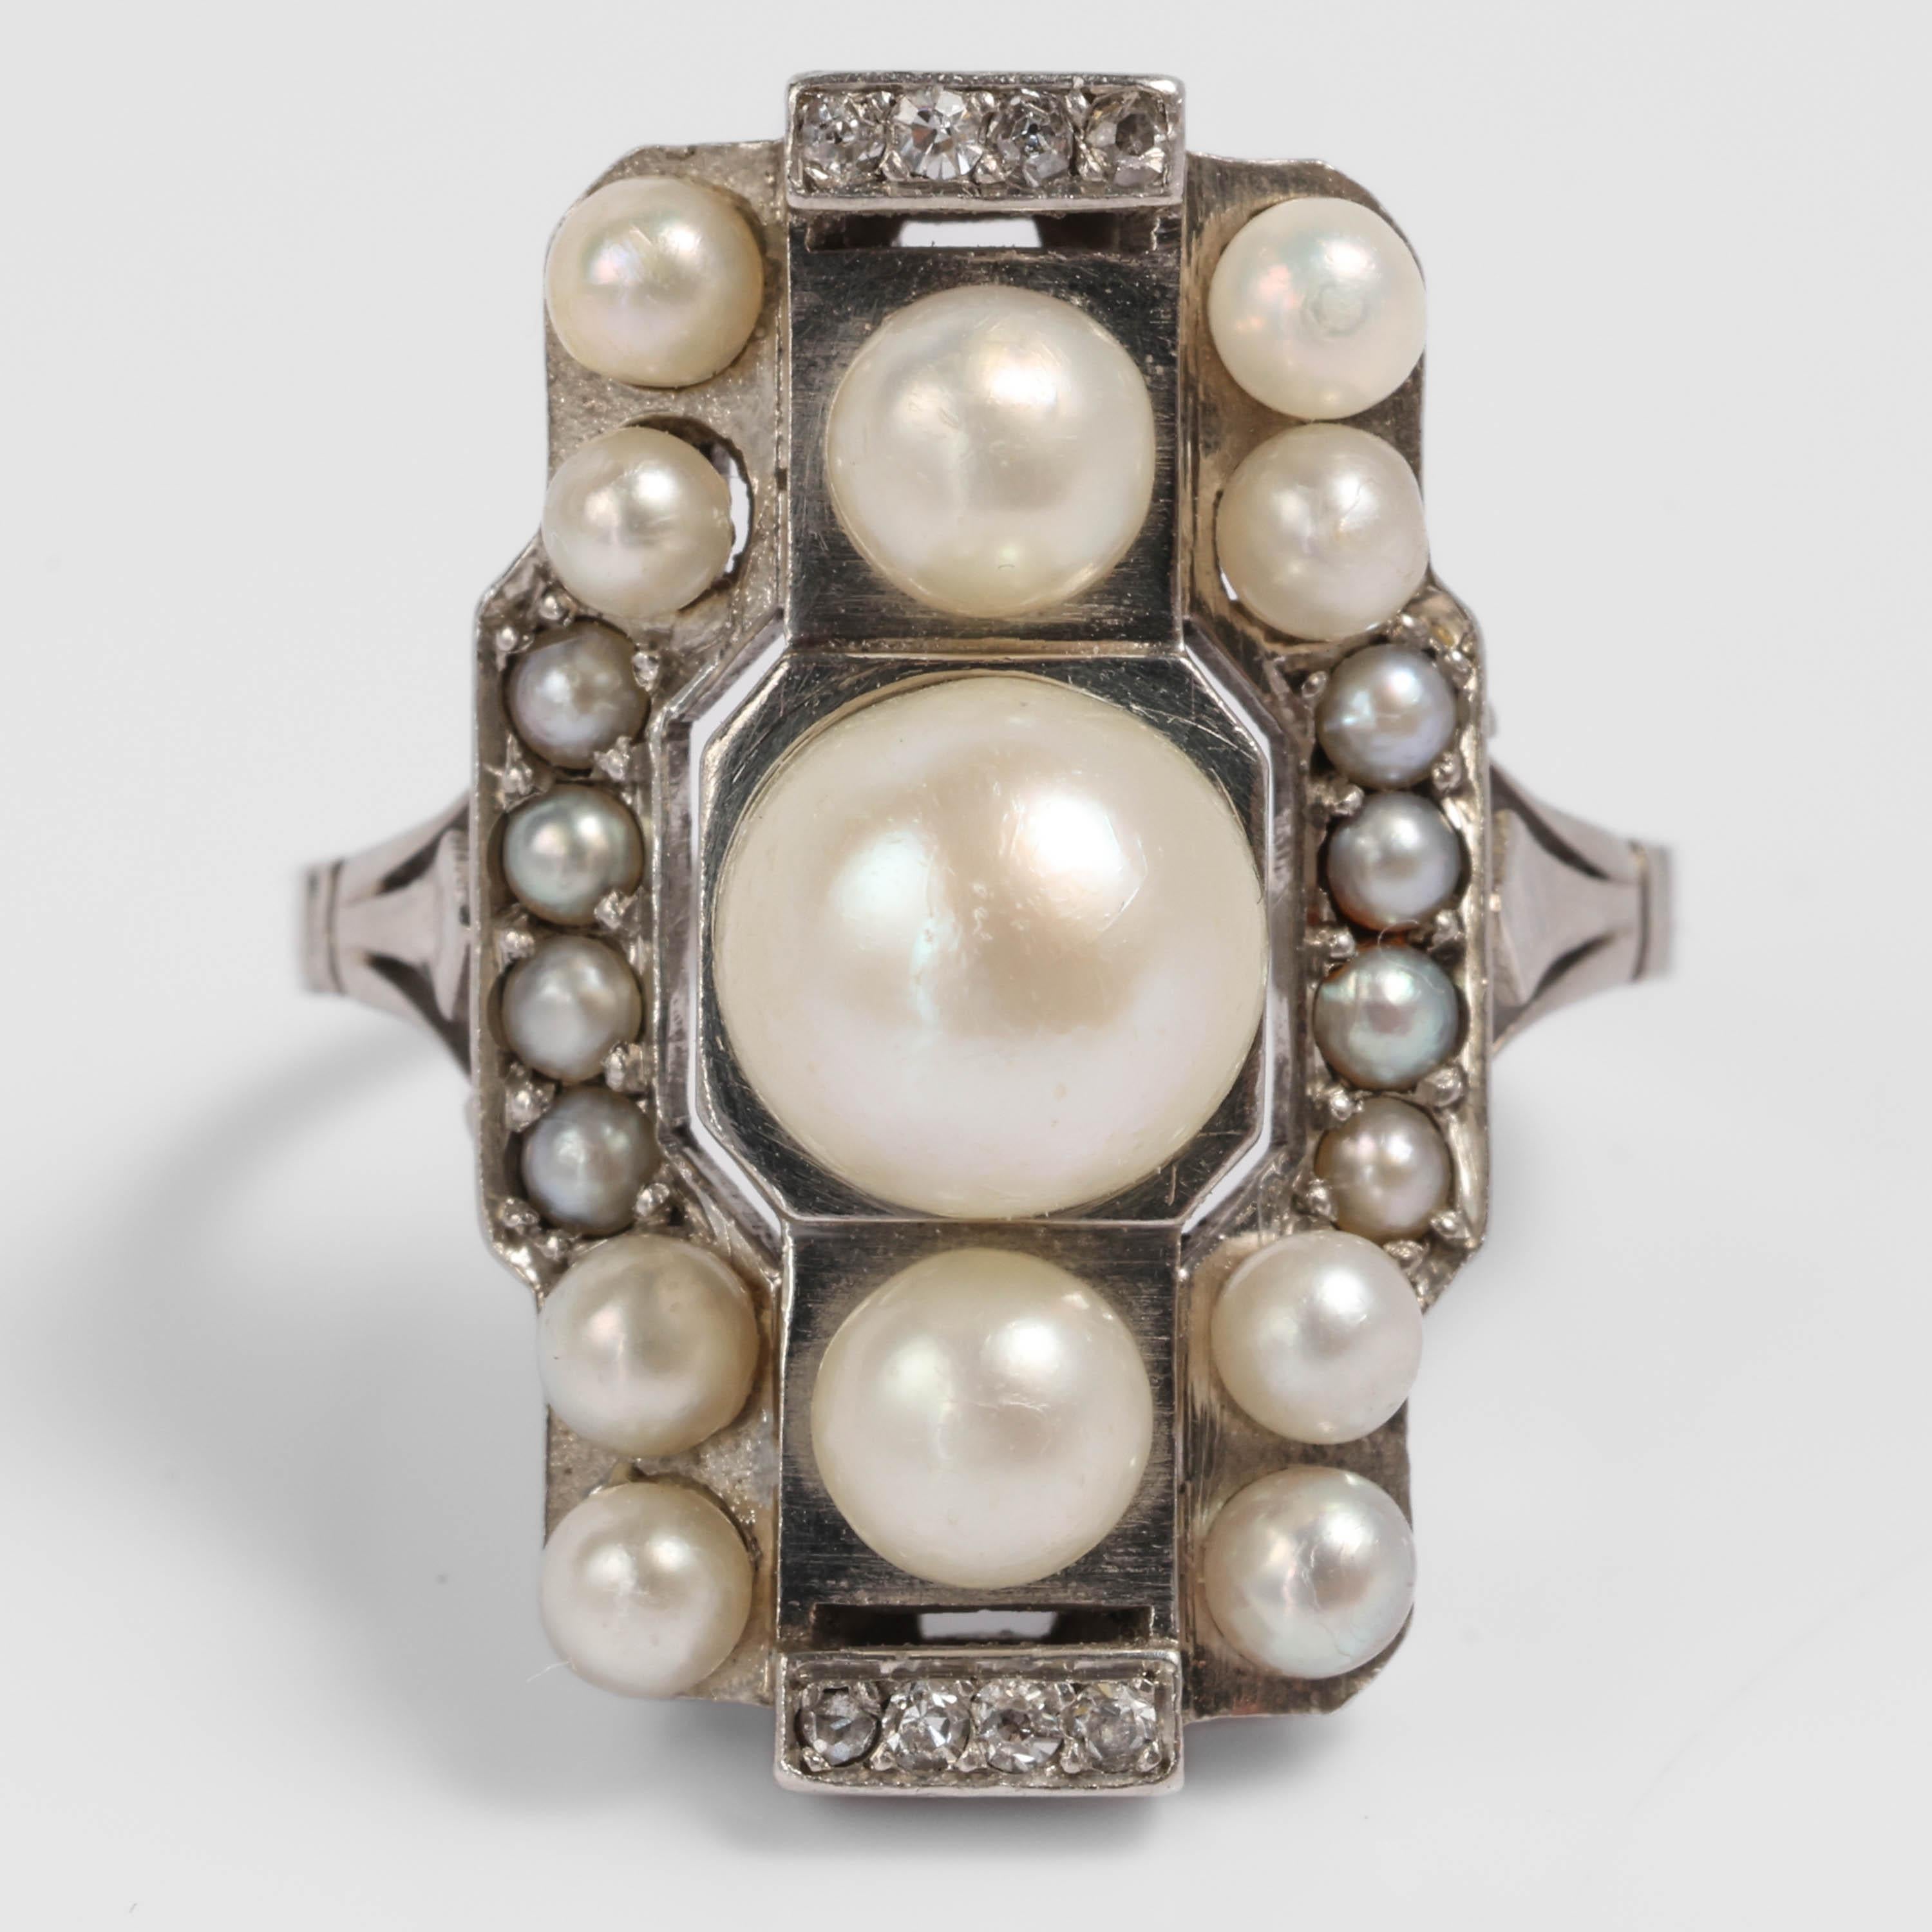 A French Art Deco masterpiece! Created in France in the 1920s, this natural saltwater pearl and diamond ring is a geometric tour de force and one of the most gorgeous natural pearl rings in my collection. 

The gleaming platinum mounting was